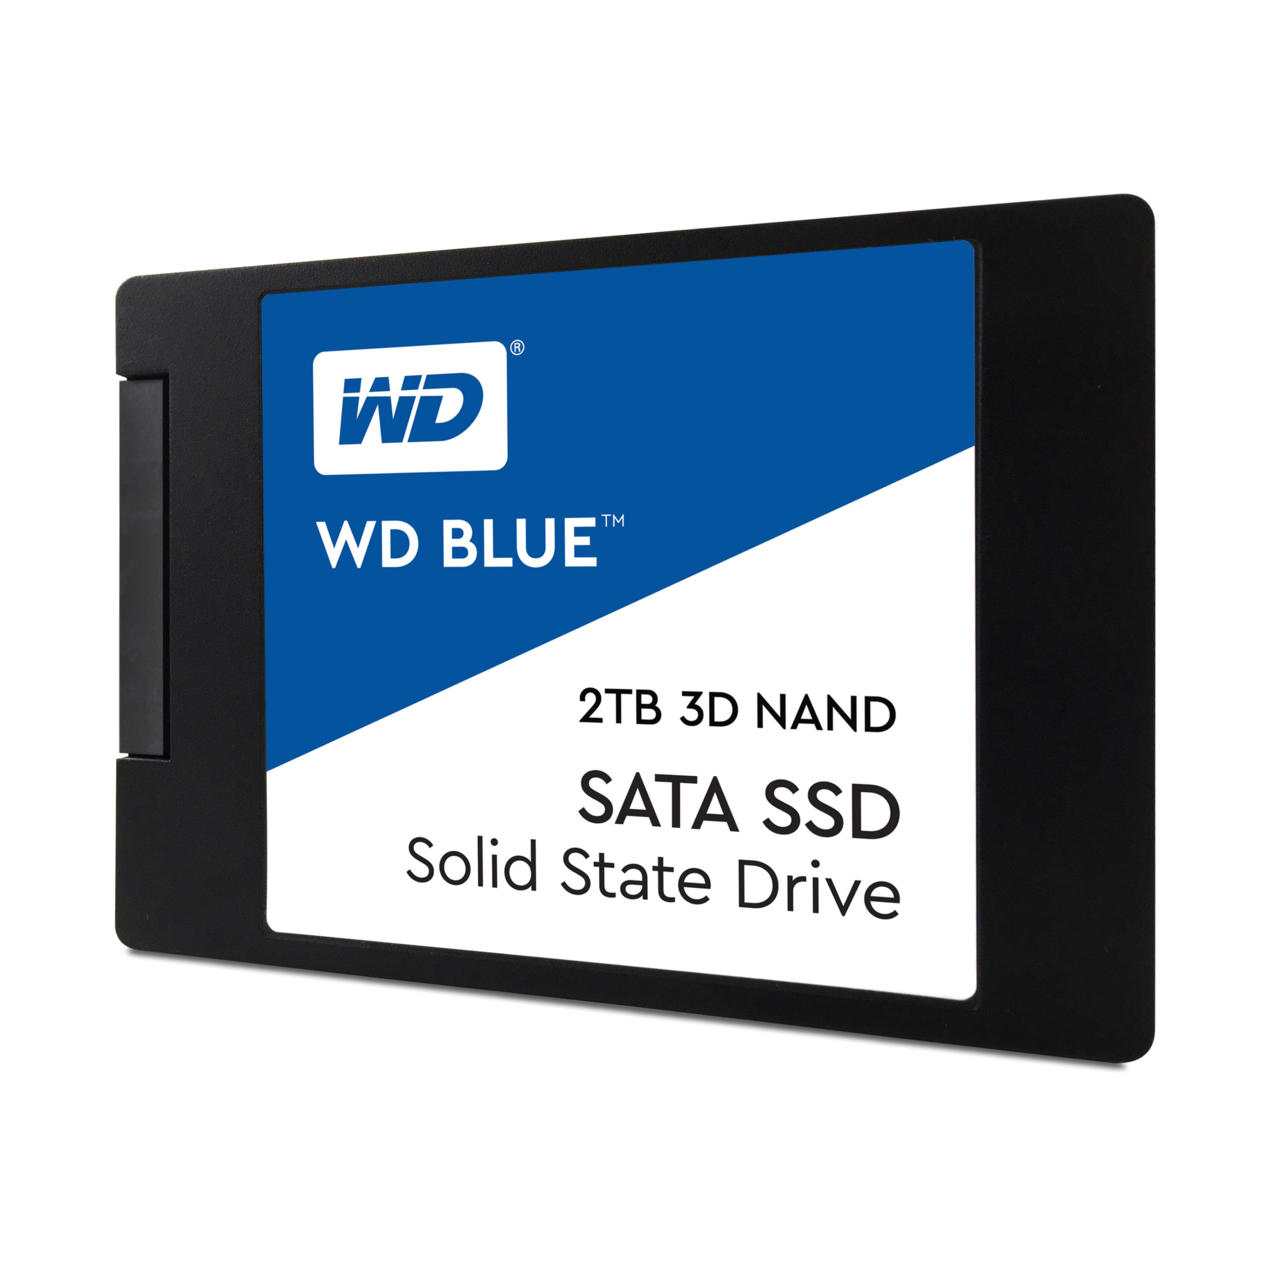 Skip the hard drive and stick with an SSD